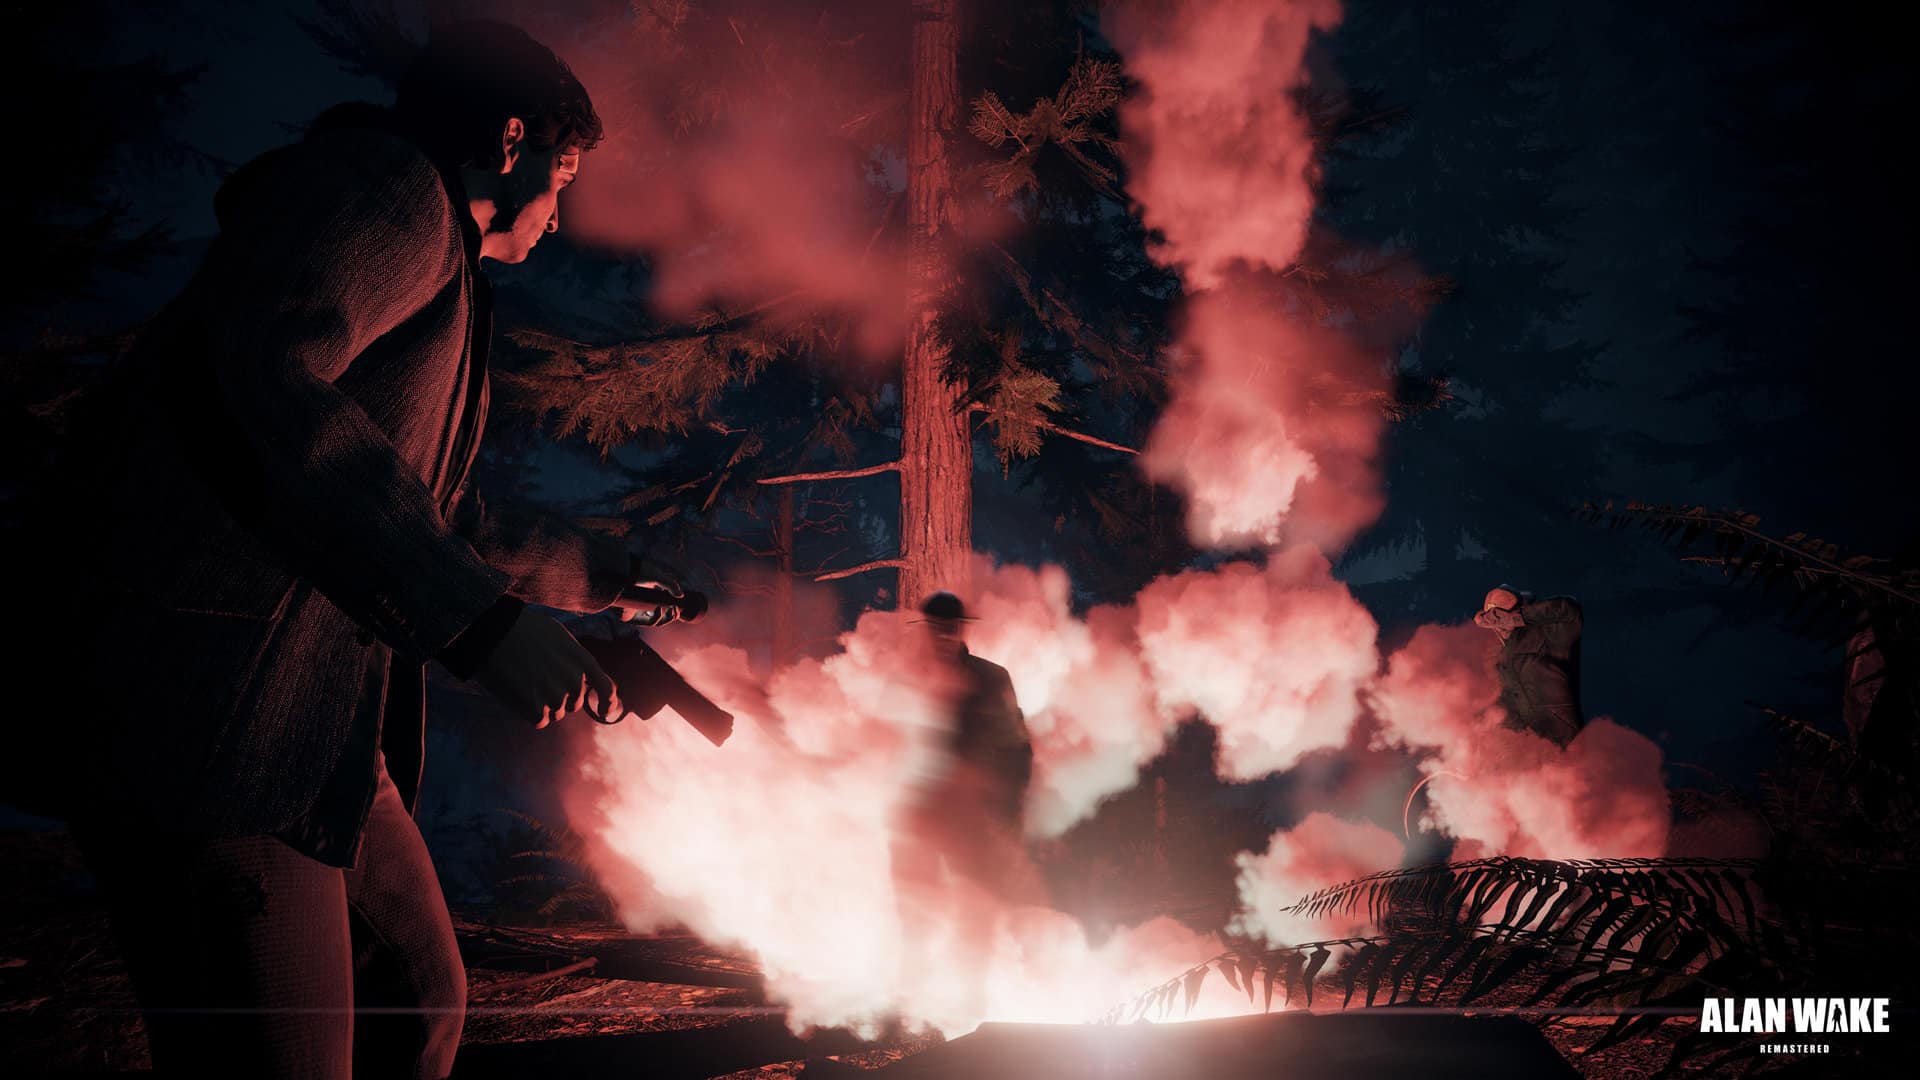 Alan Wake Remastered lights up a release date of October 5